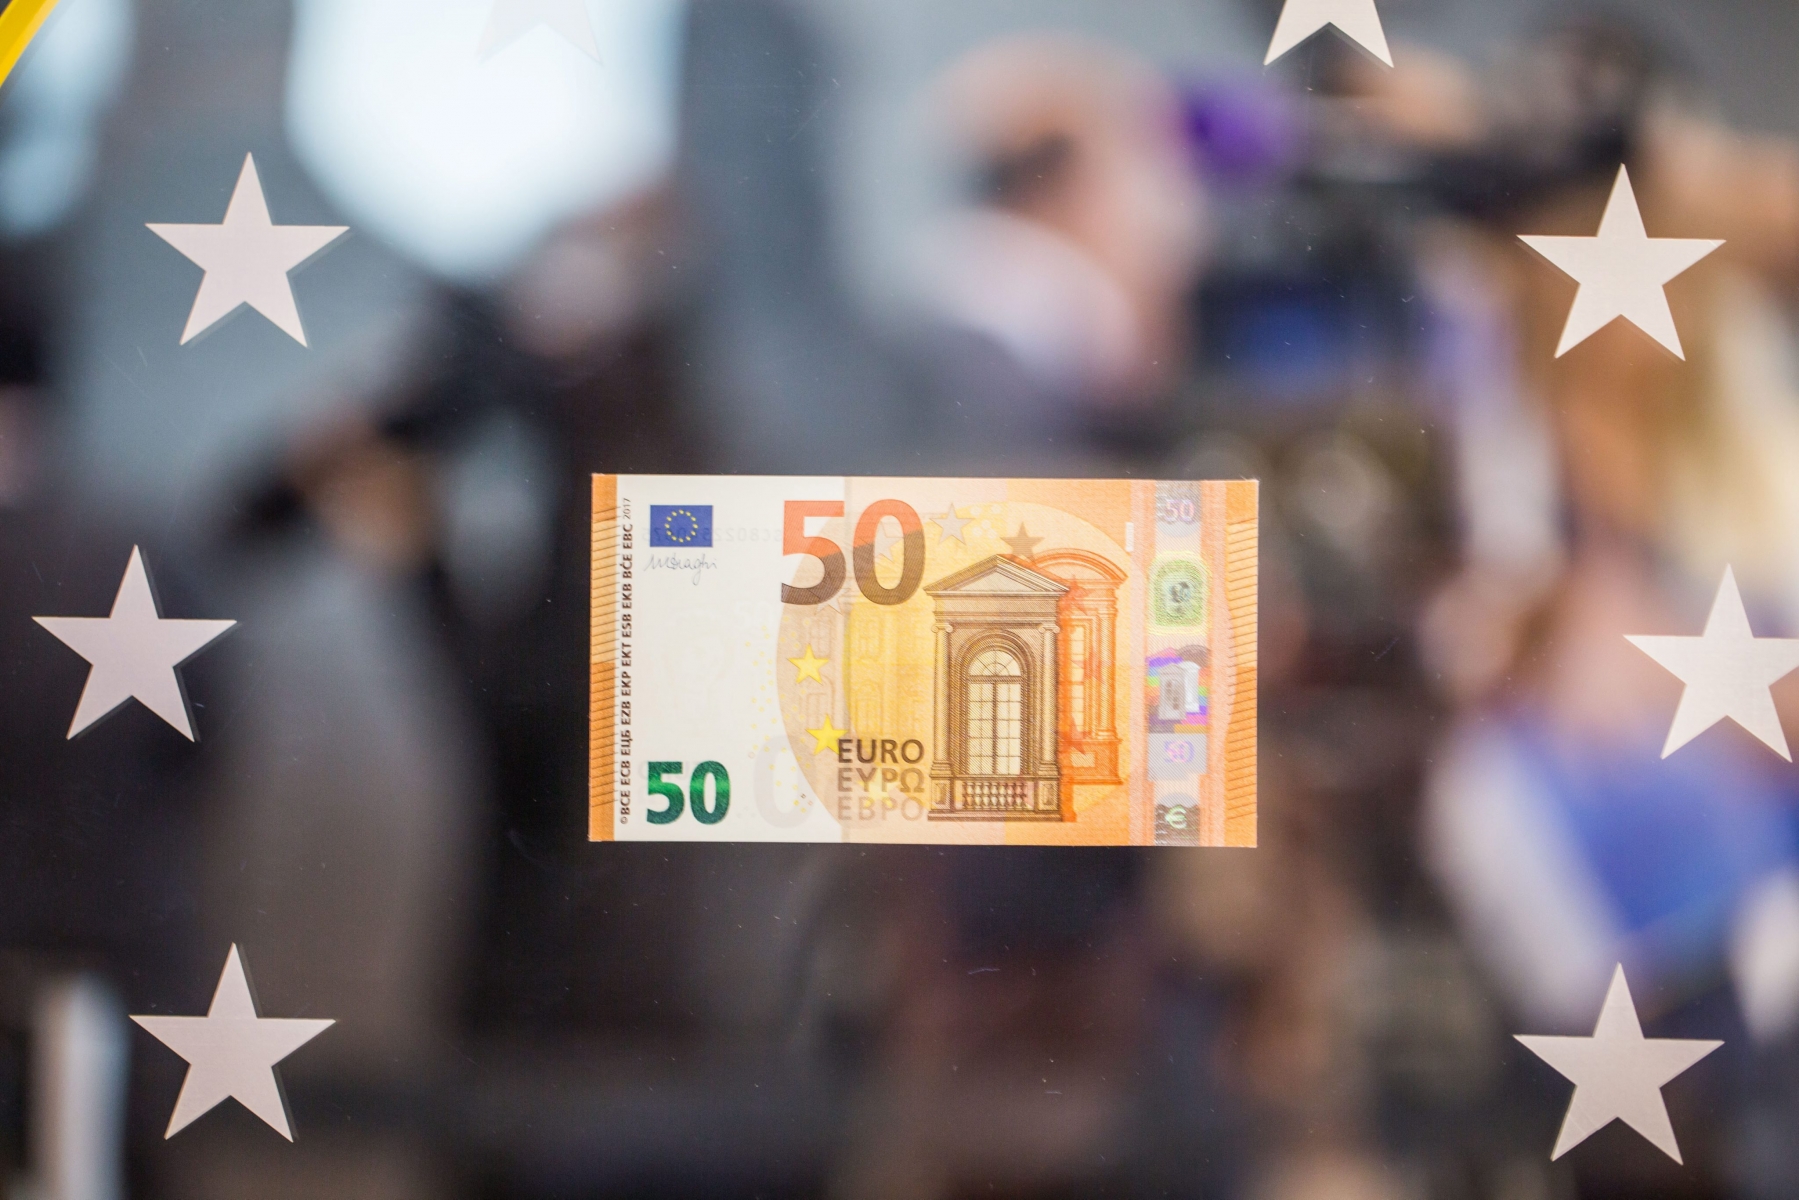 epa05408915 The new 50 Euro bank note can be seen after its presentation at the headquarters of the European Central Bank (ECB),†in Frankfurt/Main, Germany, 05 July 2016.  EPA/FRANK RUMPENHORST